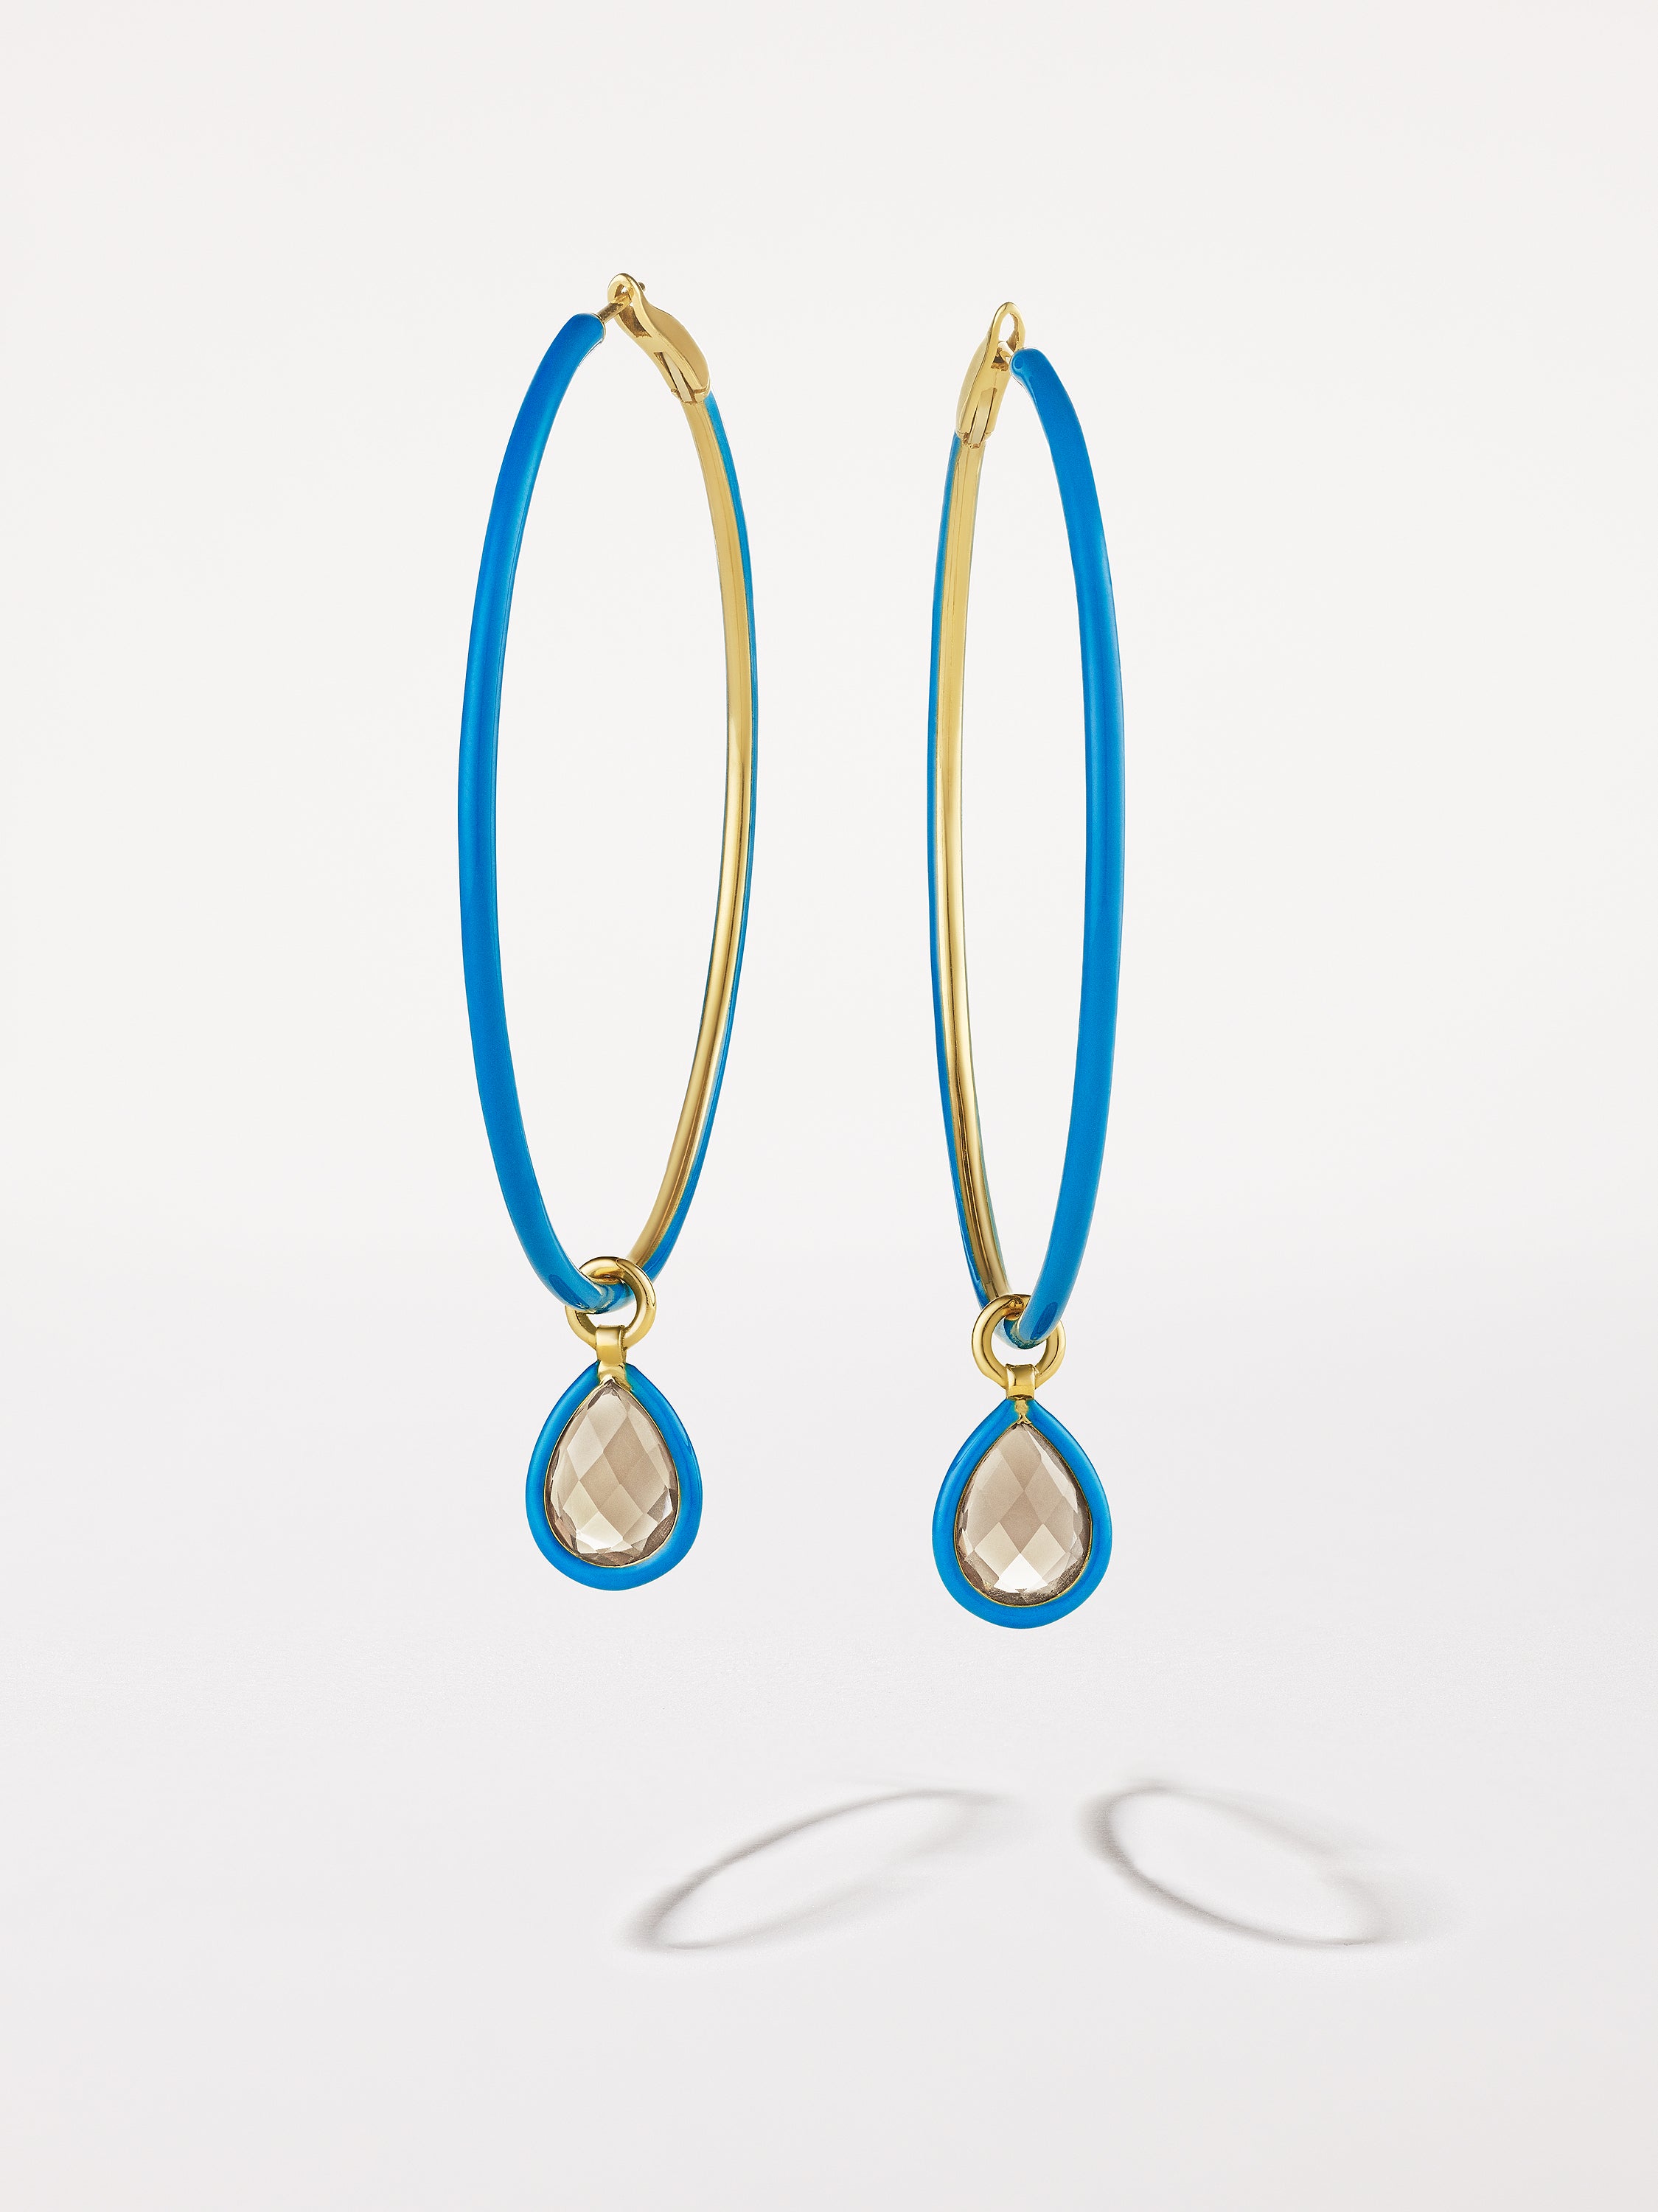 18K Yellow Gold Large French Blue Enamel Hoops with Smoky Topaz Charms